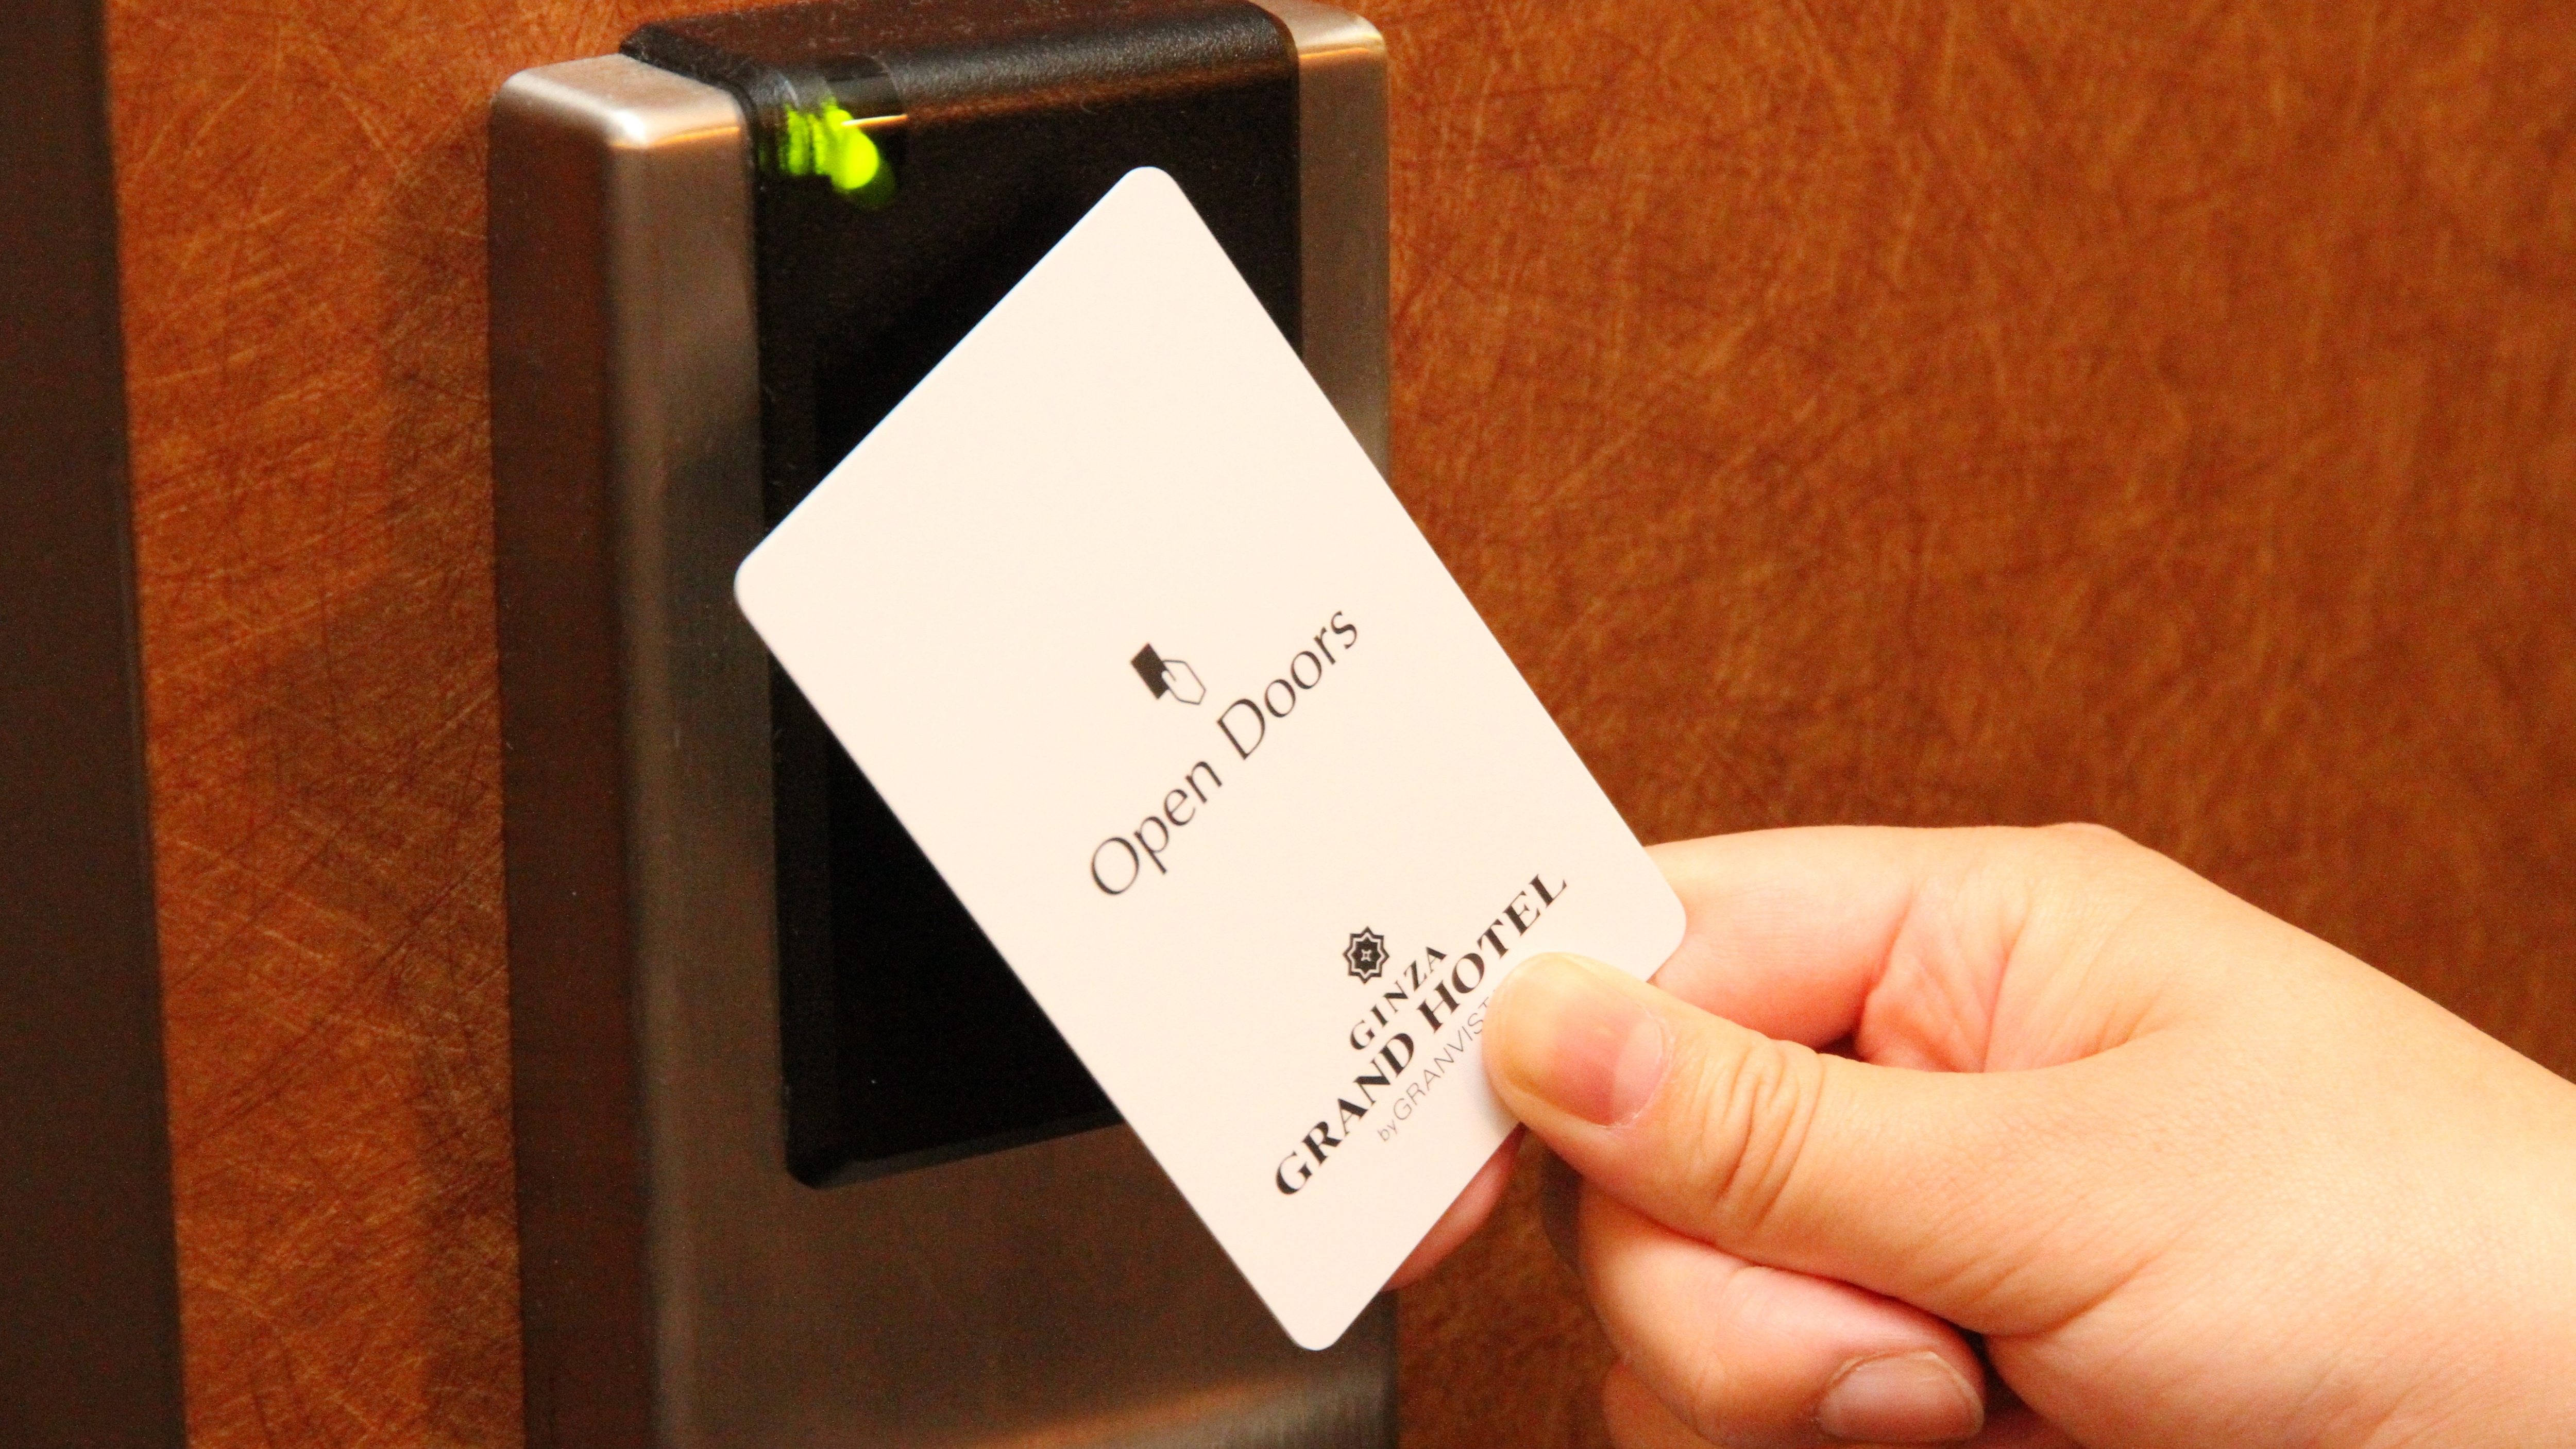 Card key (please touch when entering the room)